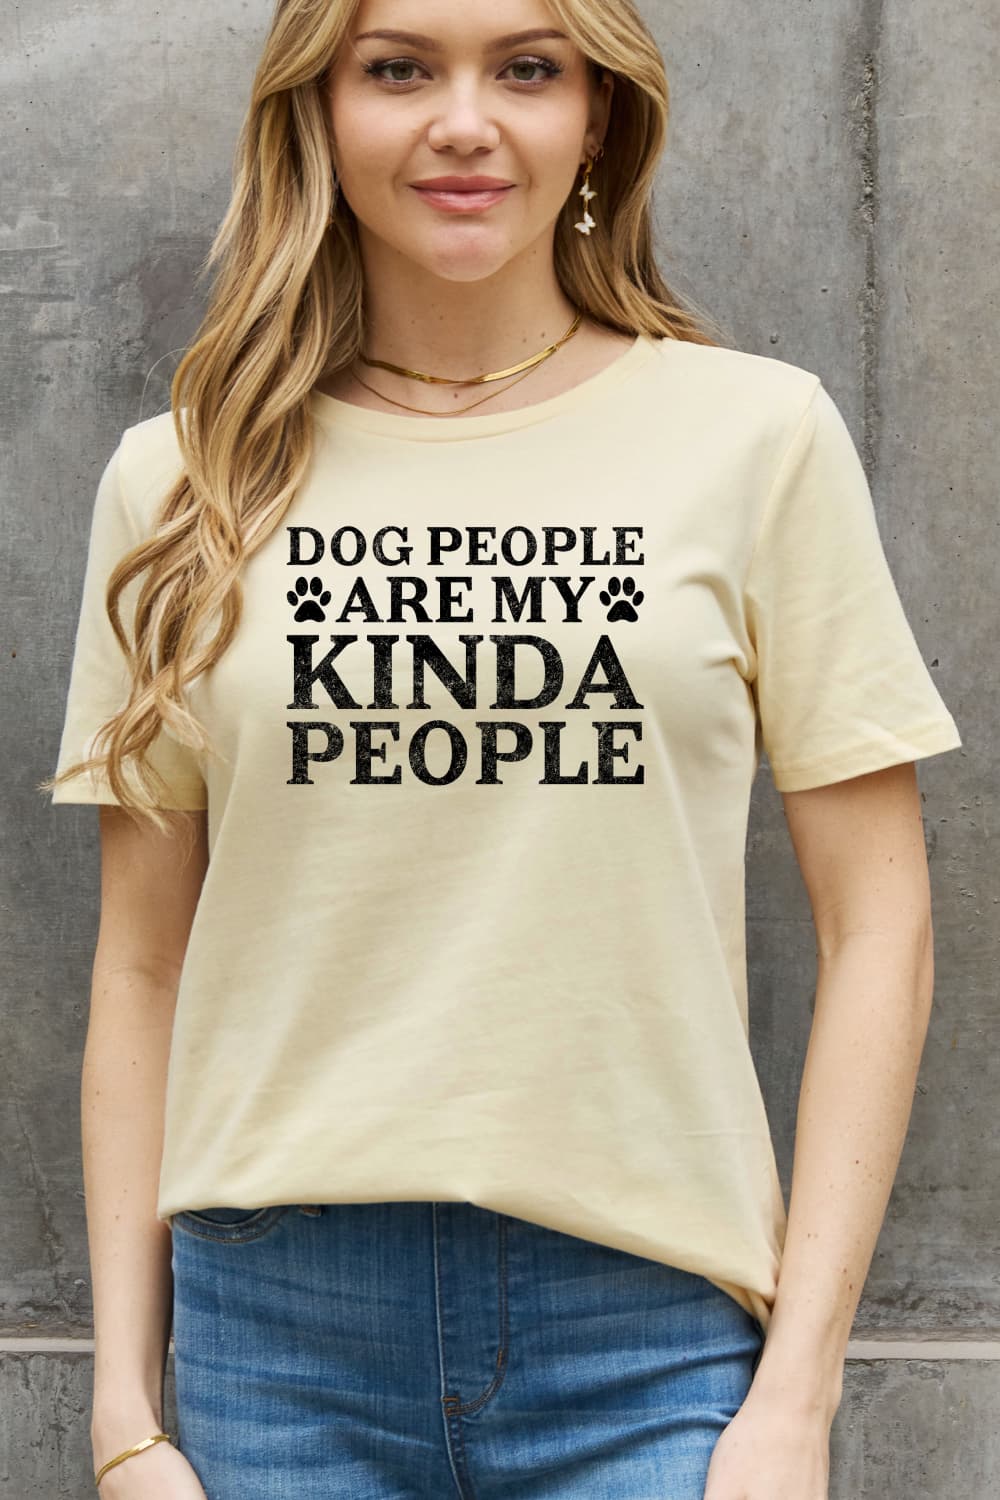 DOG PEOPLE ARE MY KINDA PEOPLE Graphic Cotton Tee - T-Shirts - Shirts & Tops - 4 - 2024